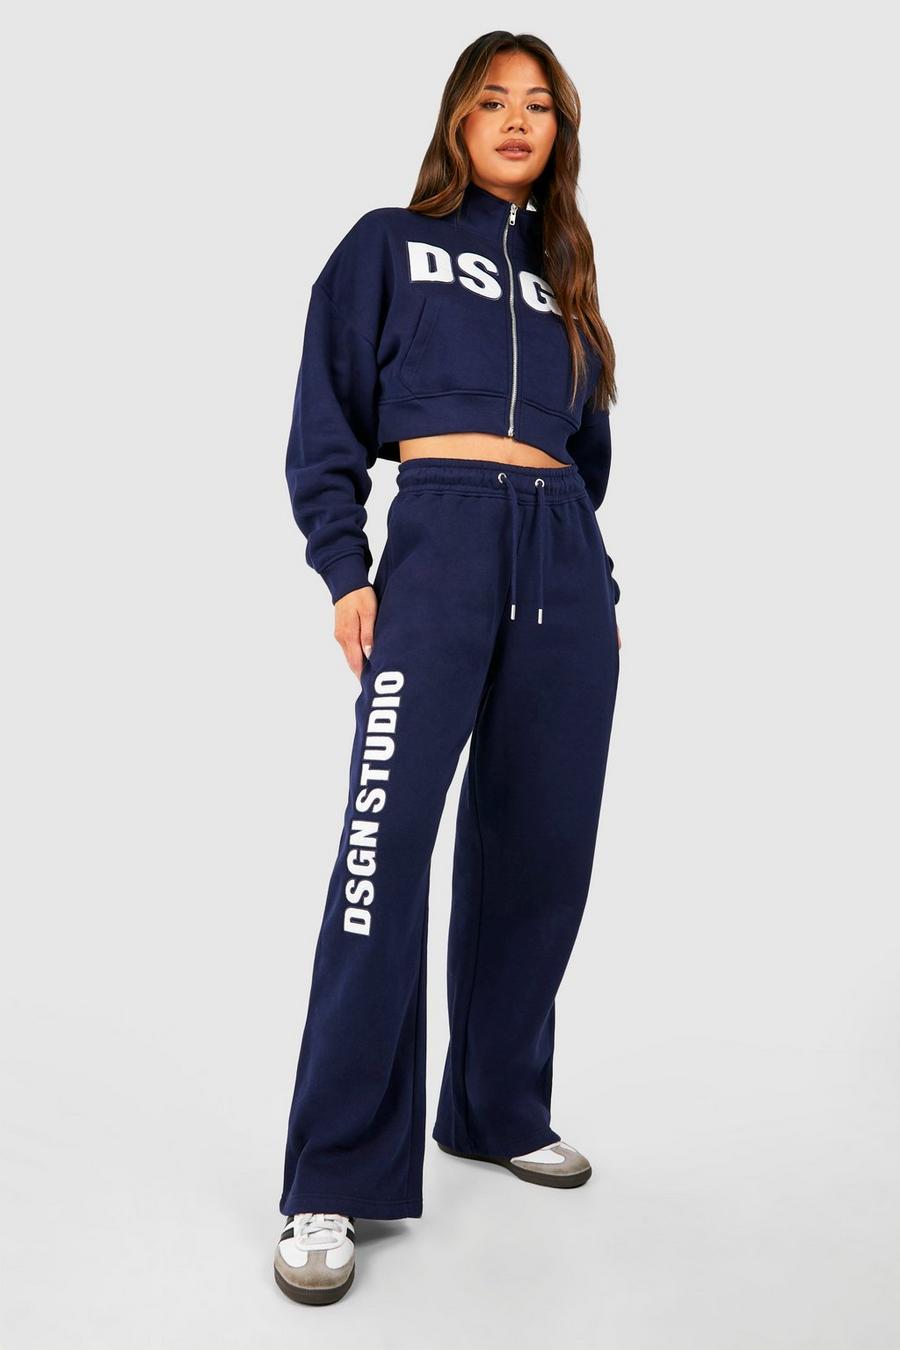 Navy Dsgn Studio Embroidered Cropped Sweatshirt Tracksuit